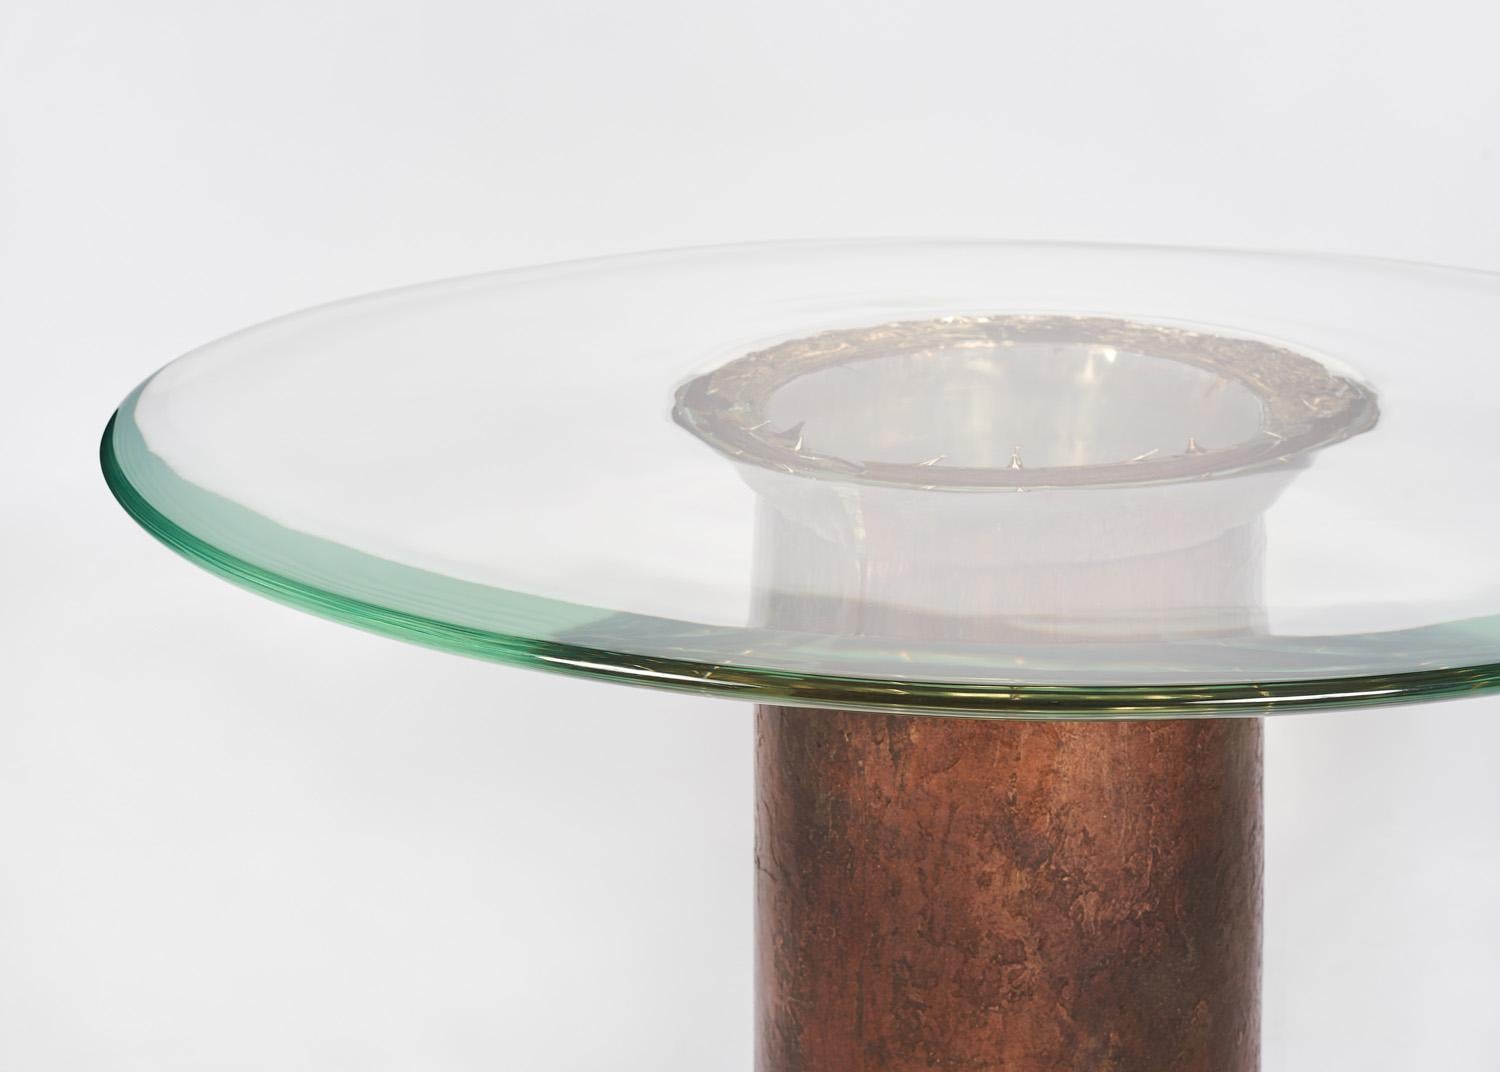 VORTEX is an ever-evolving series of unique, limited-edition tables, realised in a combination of resin and bronze, two evocatively contrasting materials by nature. By infusing the stern contemporary with the warmness of the classic, the resulting